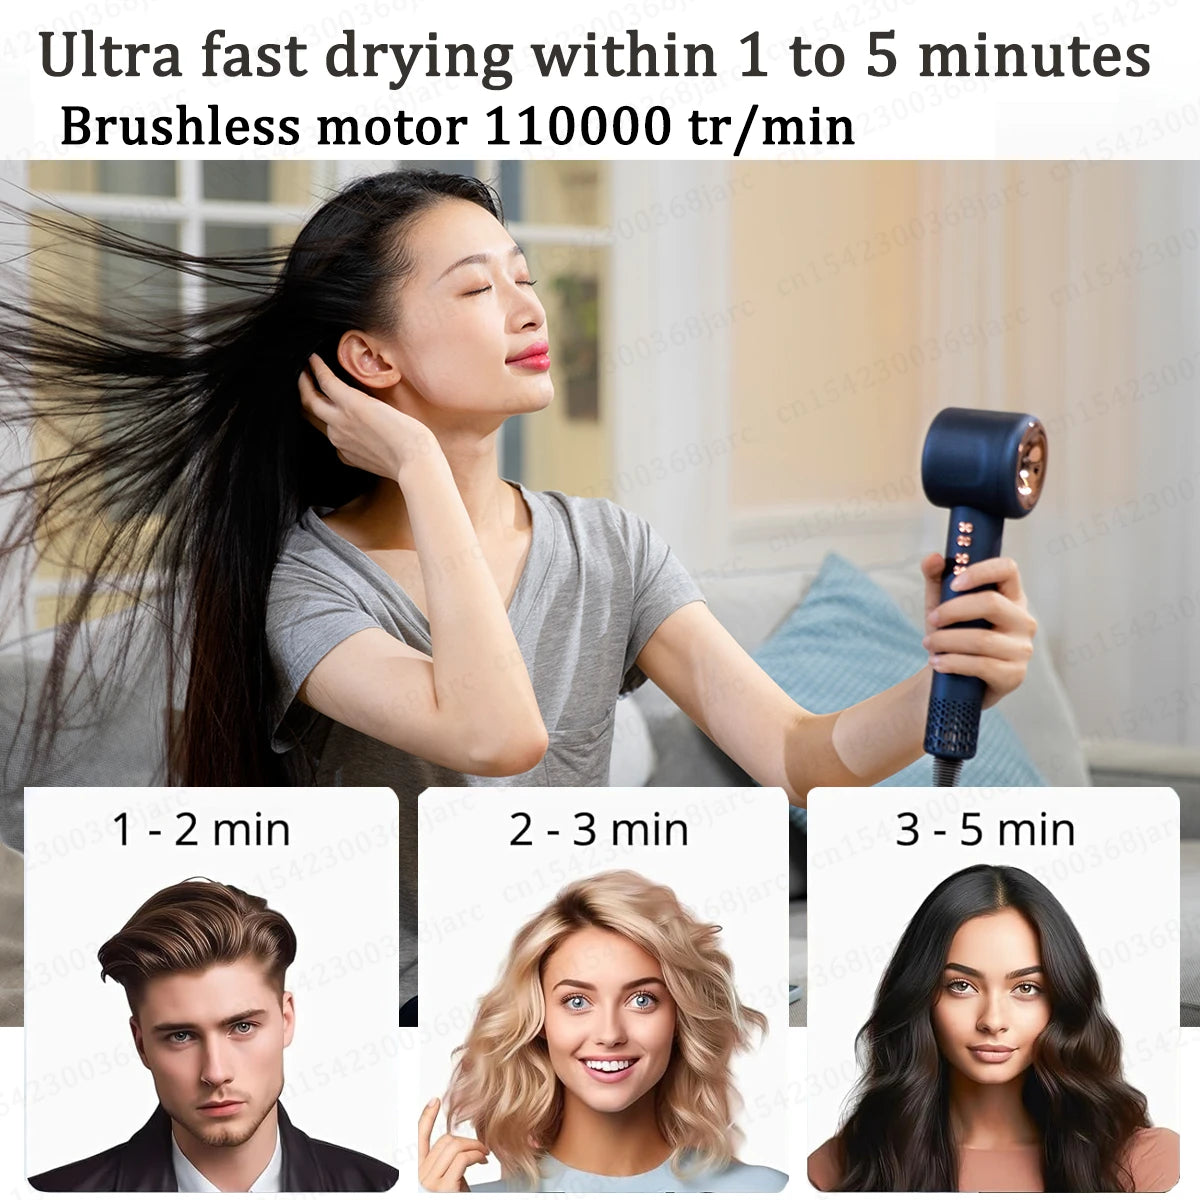 Super Hair Dryer 220V Leafless Hair dryer Personal Hair Care Styling Negative Ion Tool Constant Anion Electric Hair Dryers

Leafless Hair Dryer

Personal Hair Care Styling Negative Ion Tool

Constant Anion Electric Hair Dryers